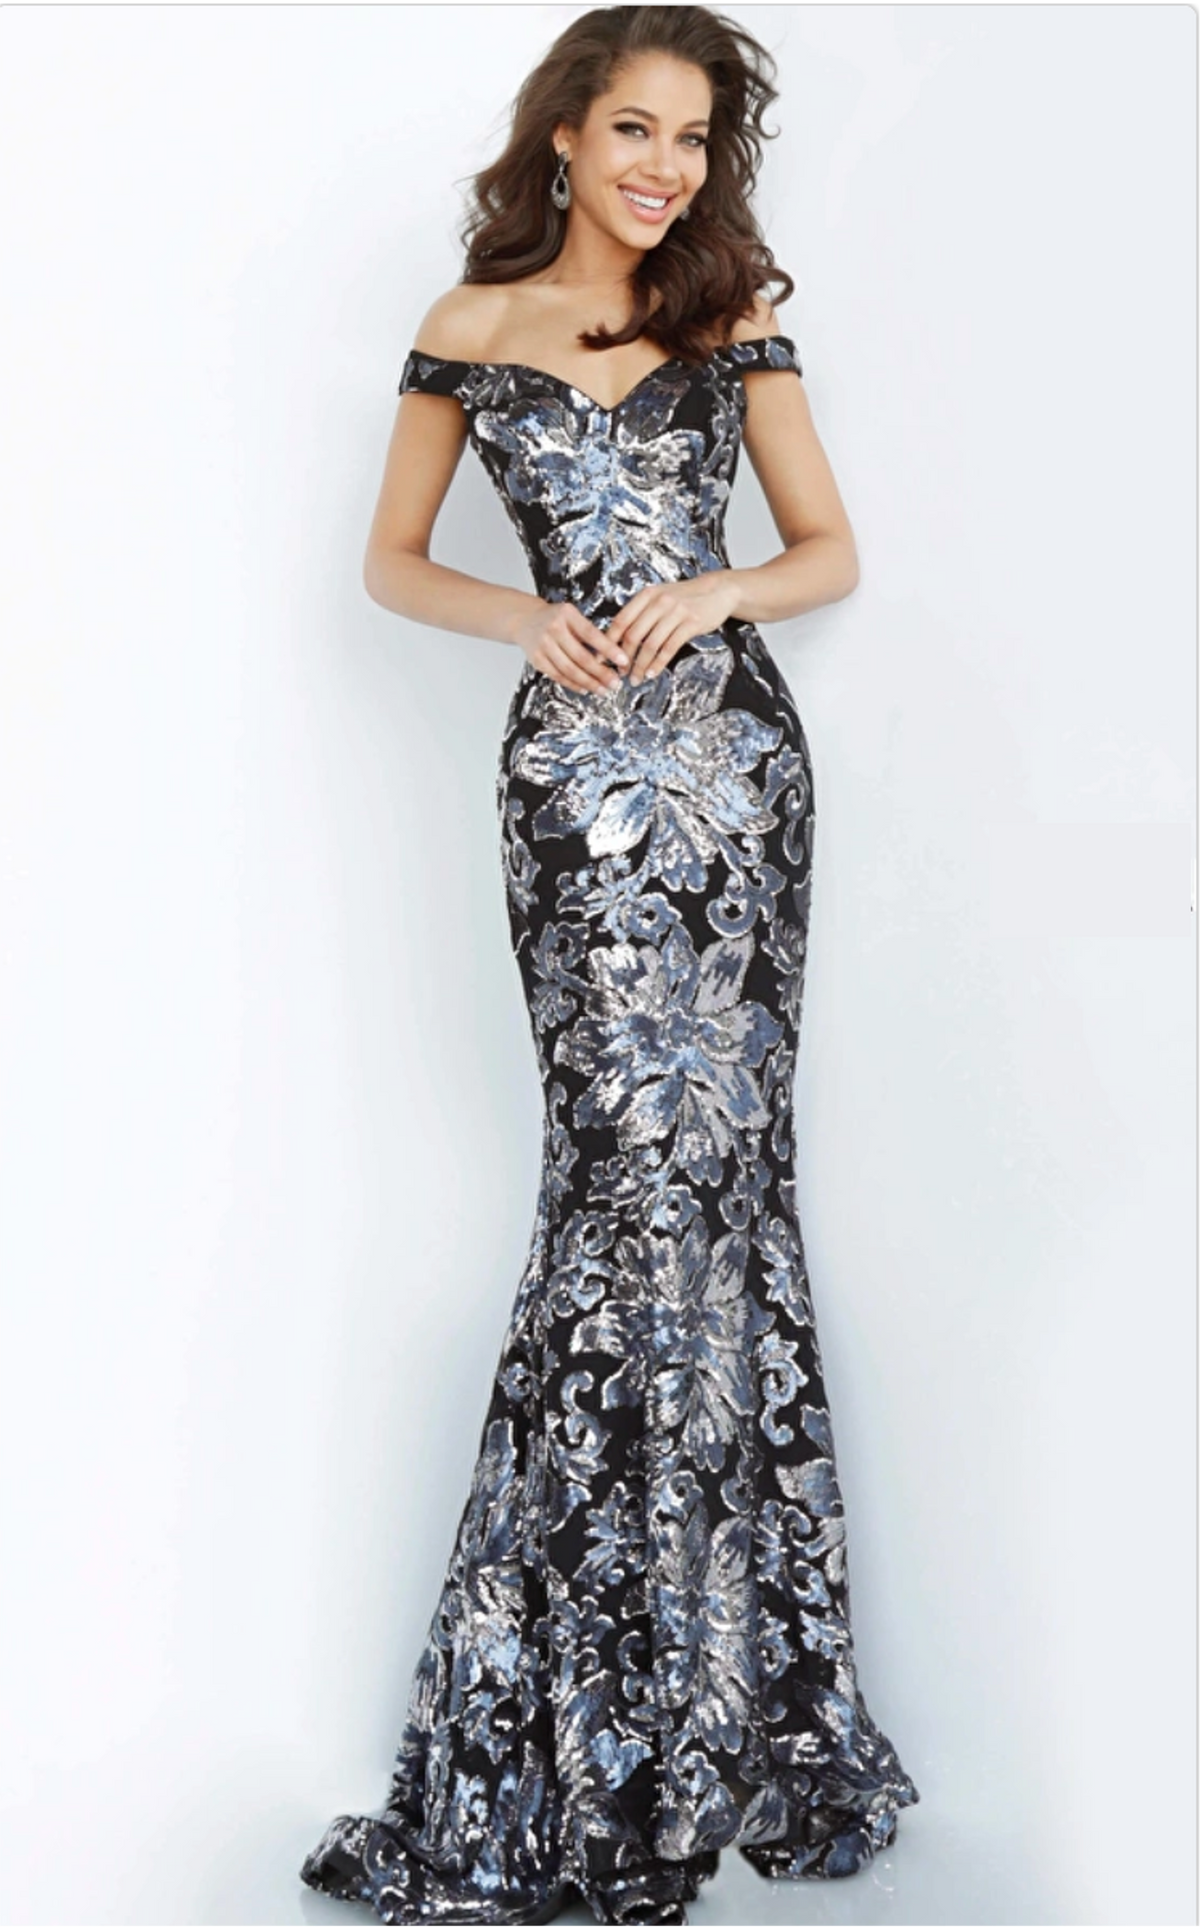 Shop Jovani 63516 Off the Shoulder Sweetheart Neck Dress in Grey, Copper/Gold, and Black/Gunmetal. Sequin details and sleeveless silhouette make it perfect for evening events, weddings, and black tie occasions. Available at Madeline's Boutique